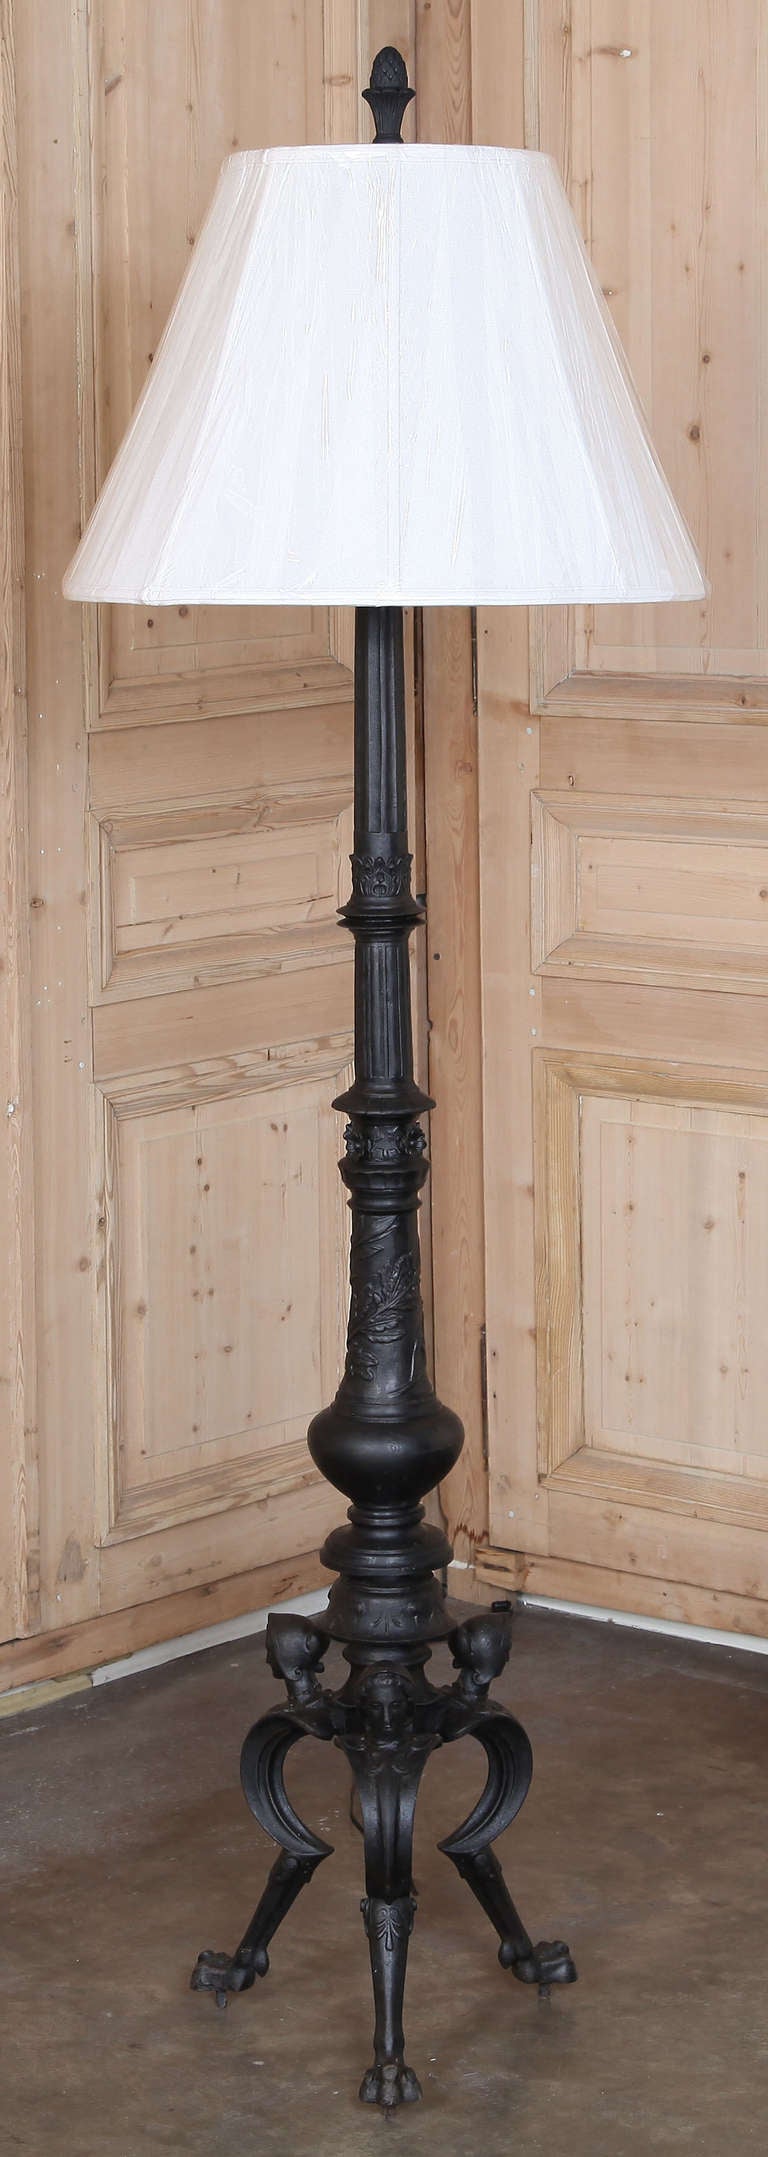 Cast from solid iron, this handsome lamp is wired to UL Standards and fitted with a hand-sewn silk shade. Exceptional detail abounds from the paw feet and angels' heads on the tripod base, up the intricately detailed shaft to the capital adorned